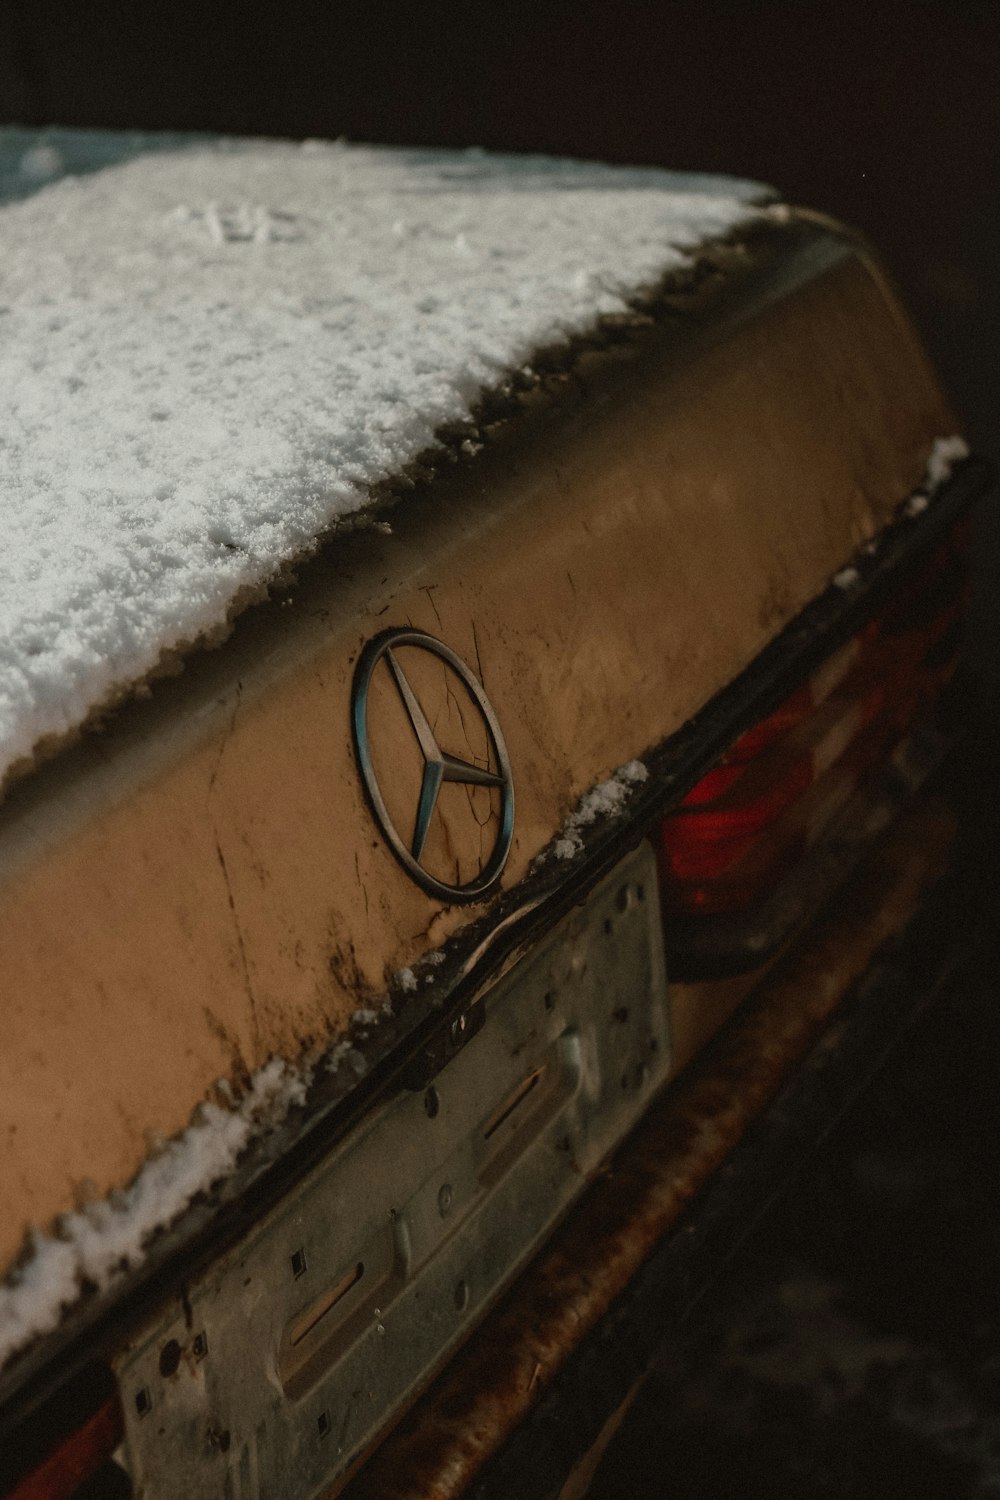 a mercedes emblem on the back of a car covered in snow